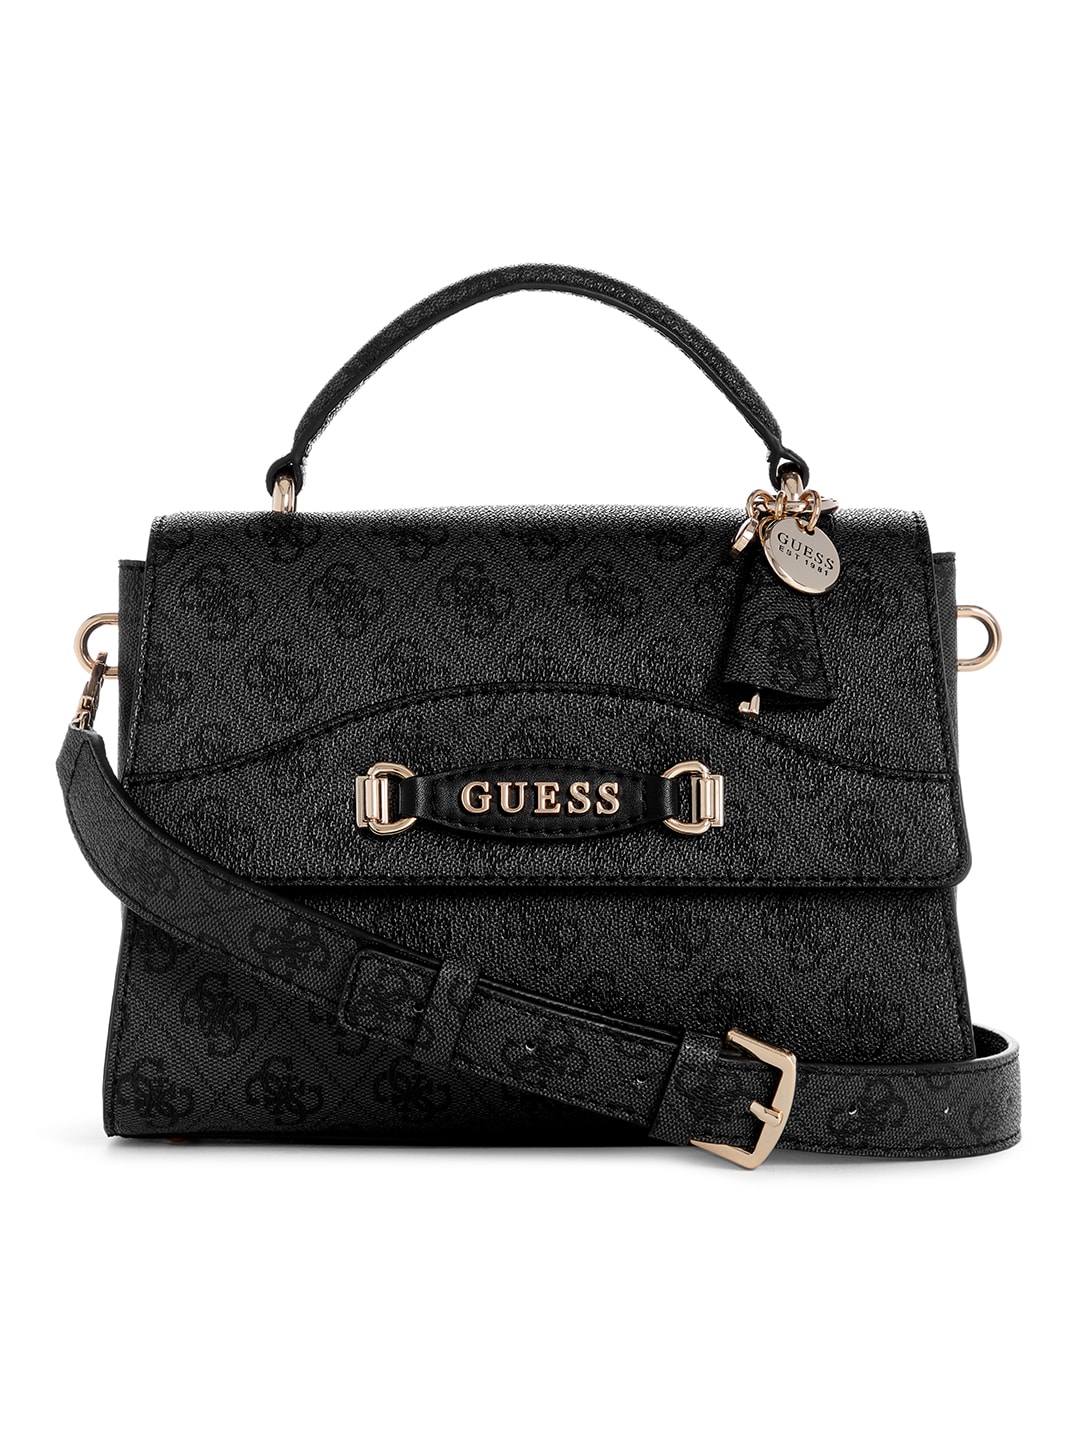 GUESS Brand Logo Printed Structured Satchel